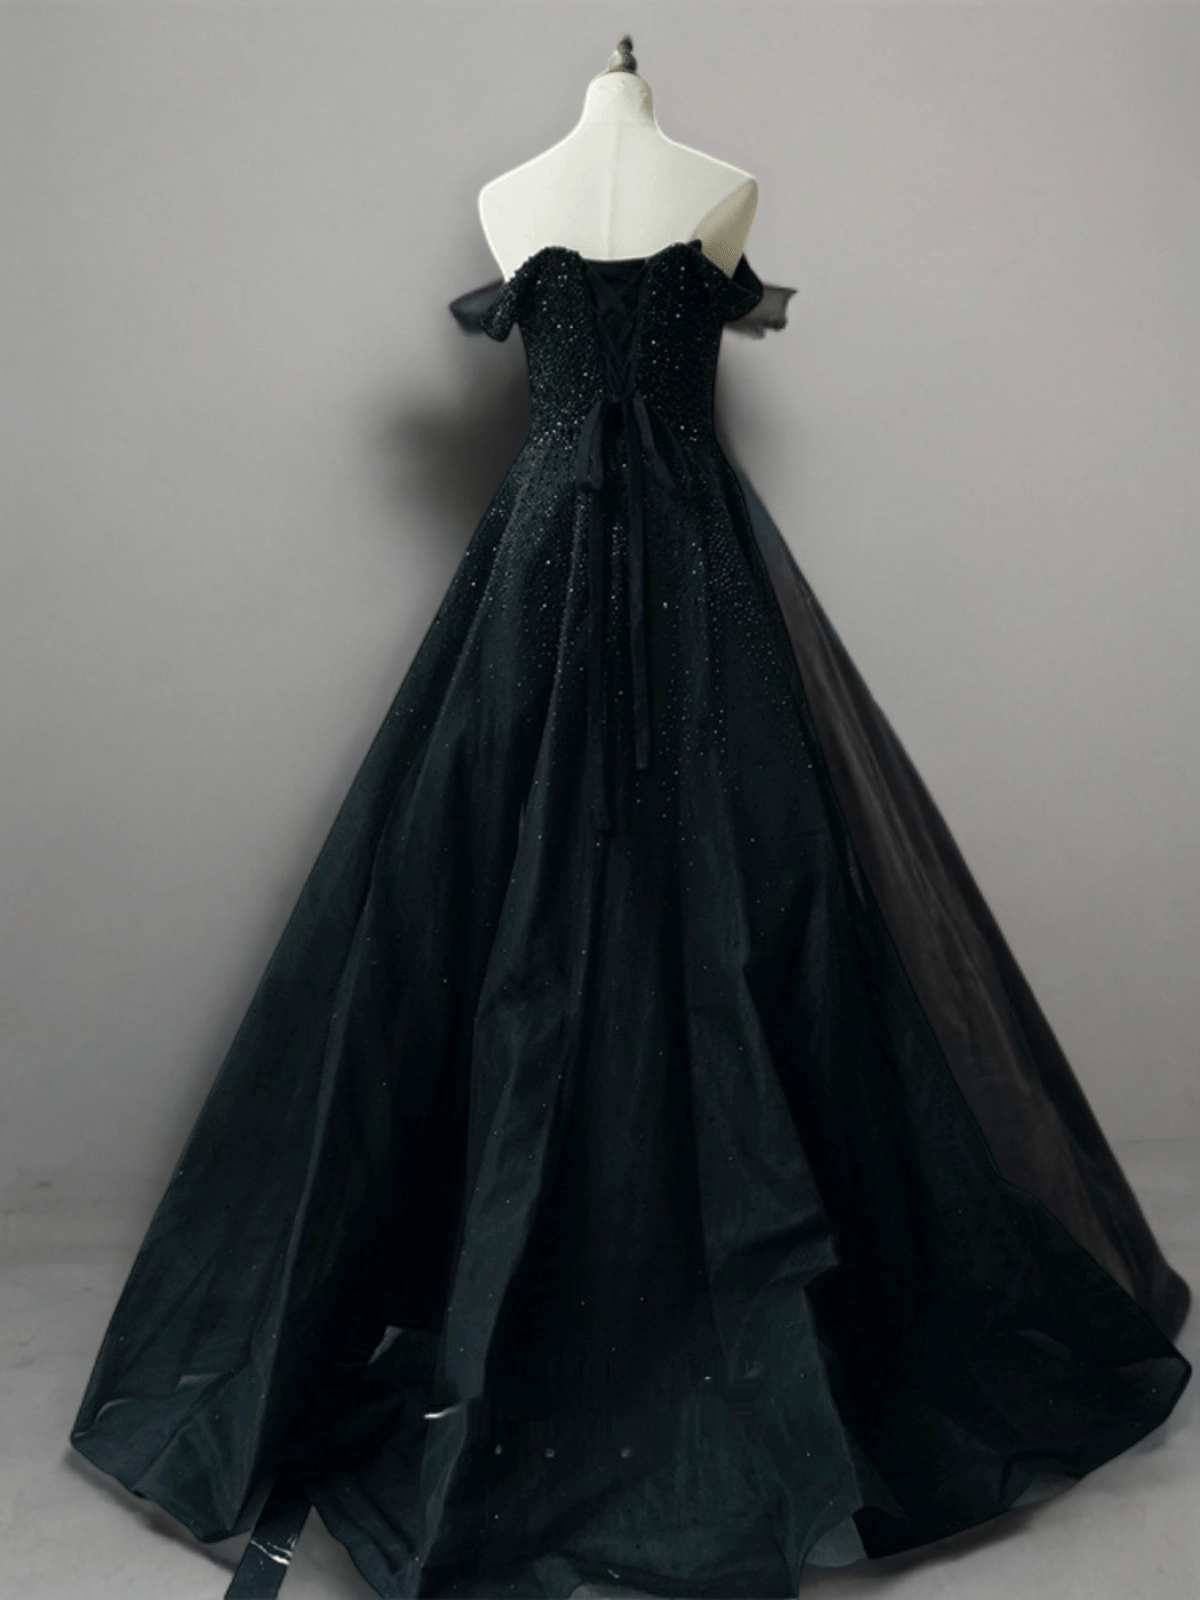 Gothic Black Sequin Ball Gown - Off-Shoulder Bridal Gown with Corset Plus Size - WonderlandByLilian